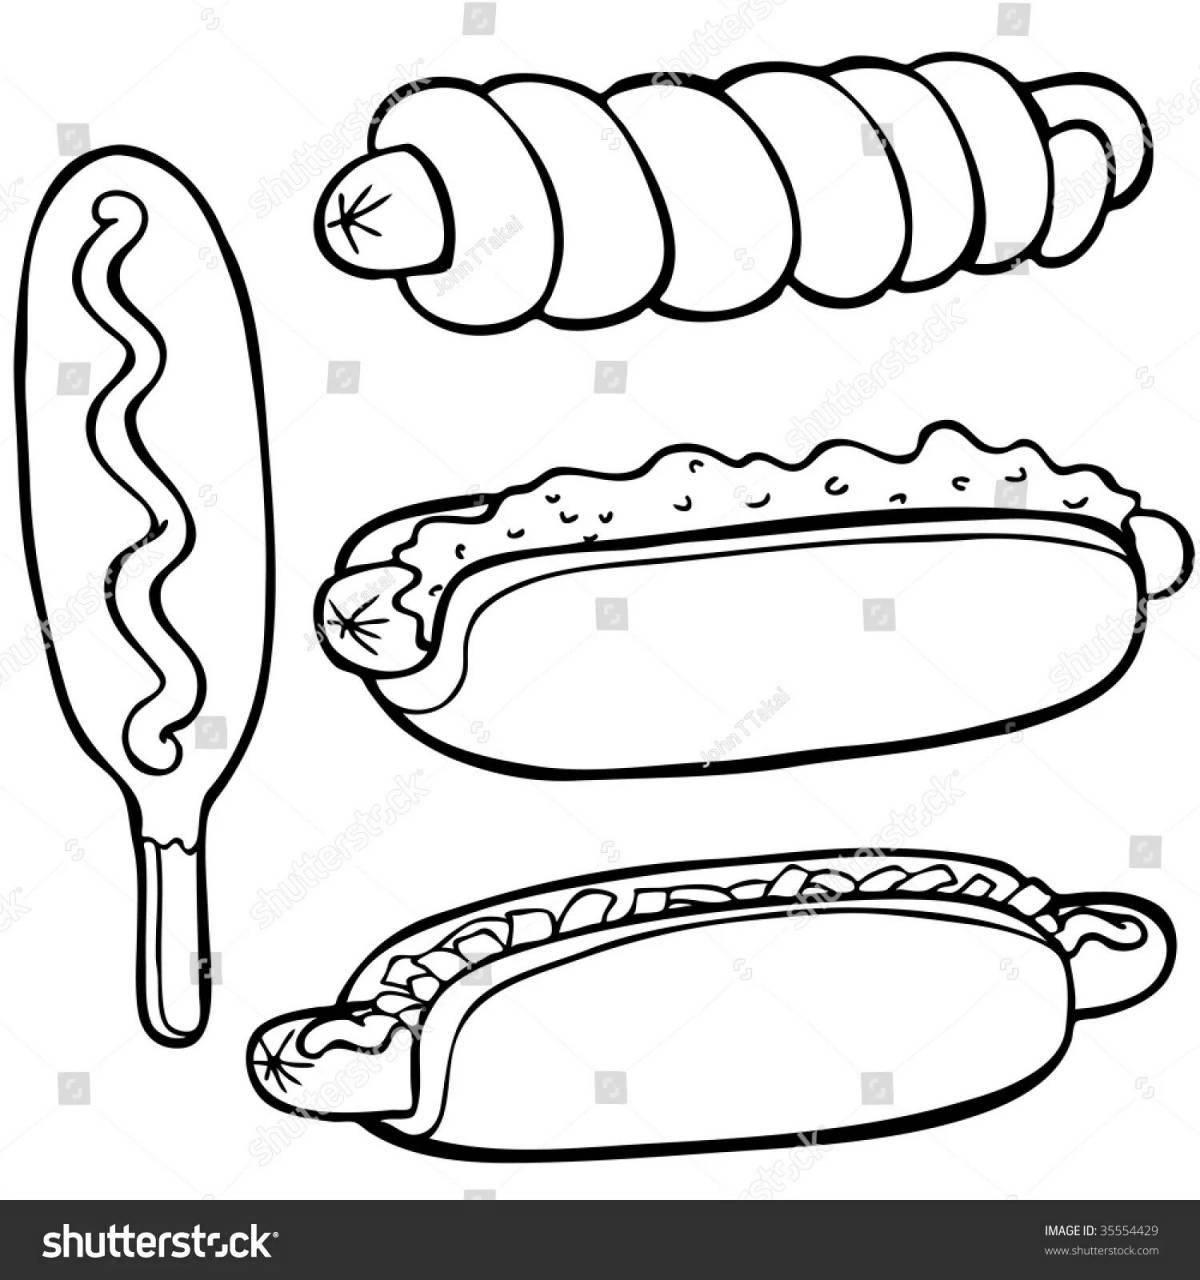 Funny sausage coloring book for kids